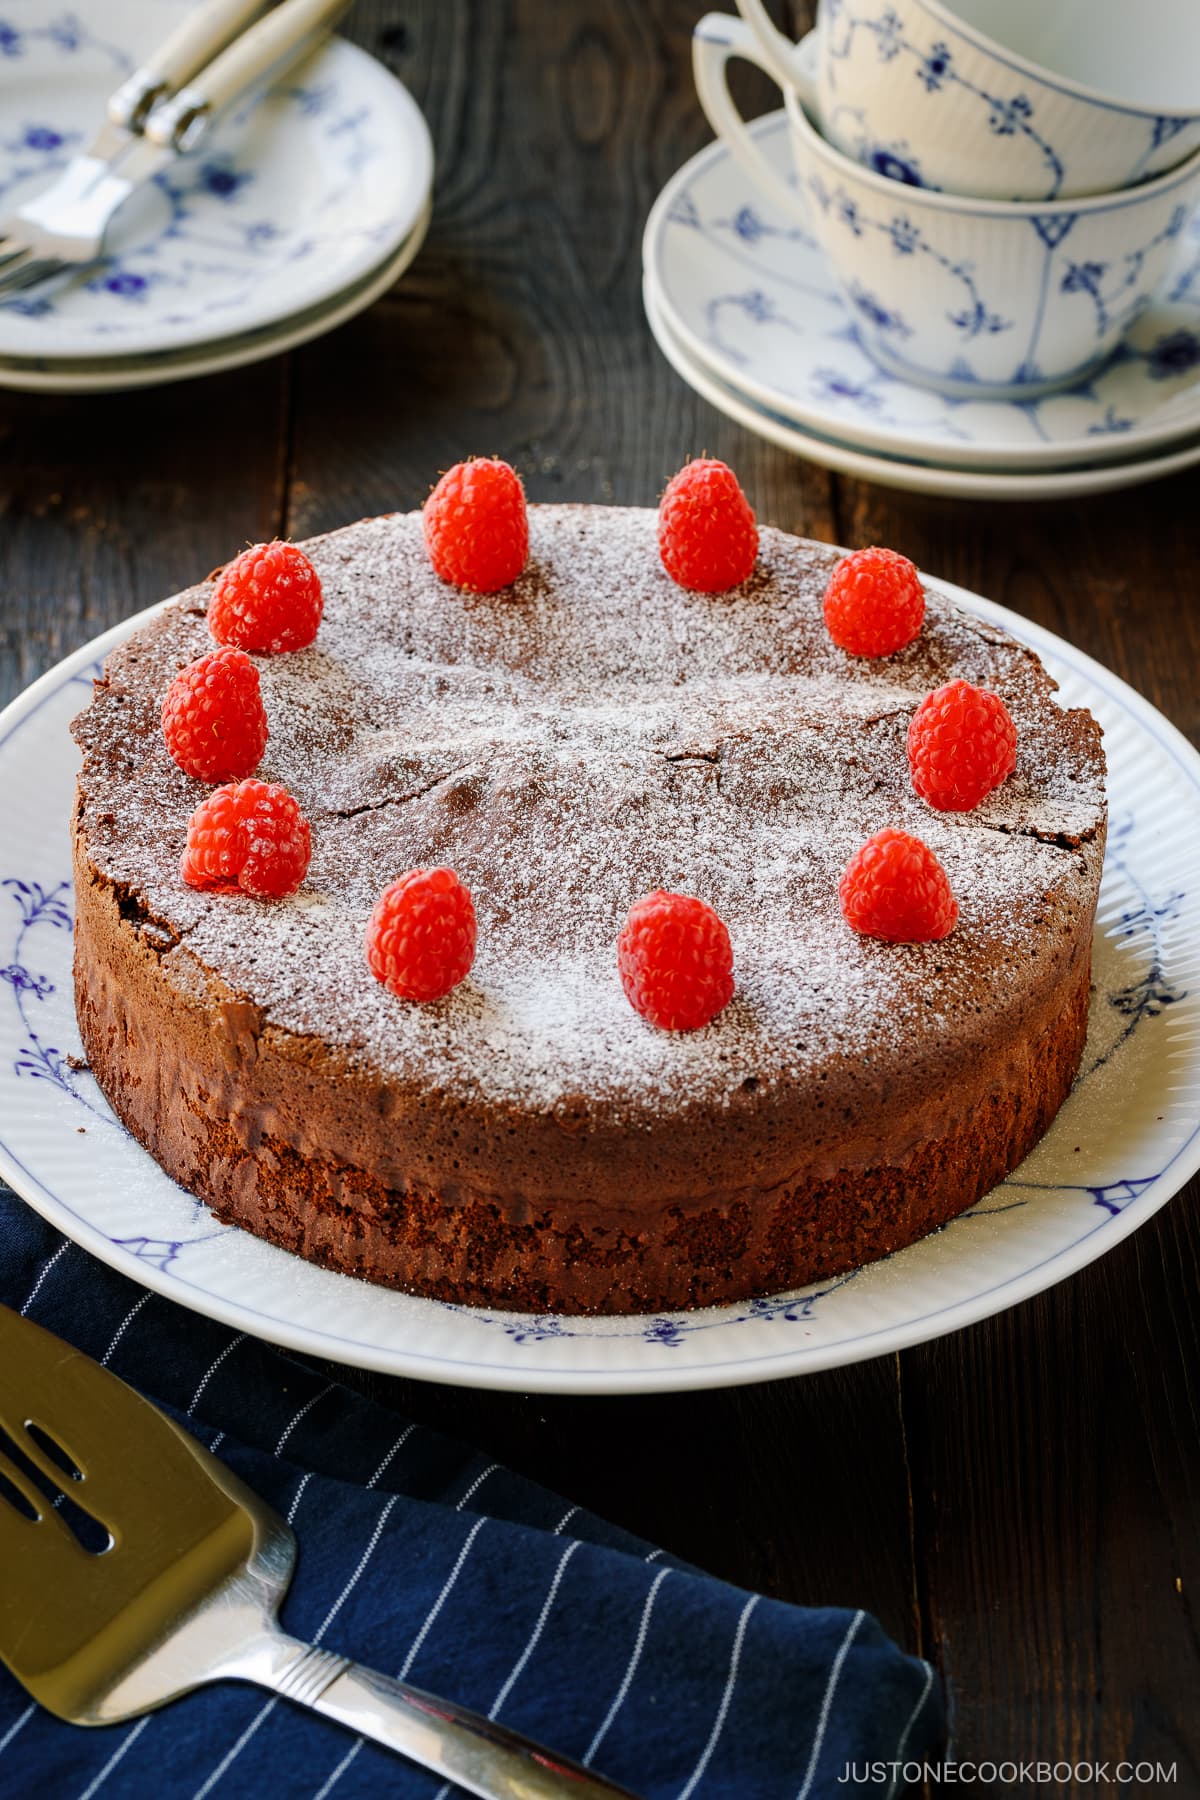 A large plate containing Chocolate Gateau (Chocolate Cake) dusted with powdered sugar and decorated with raspberries.